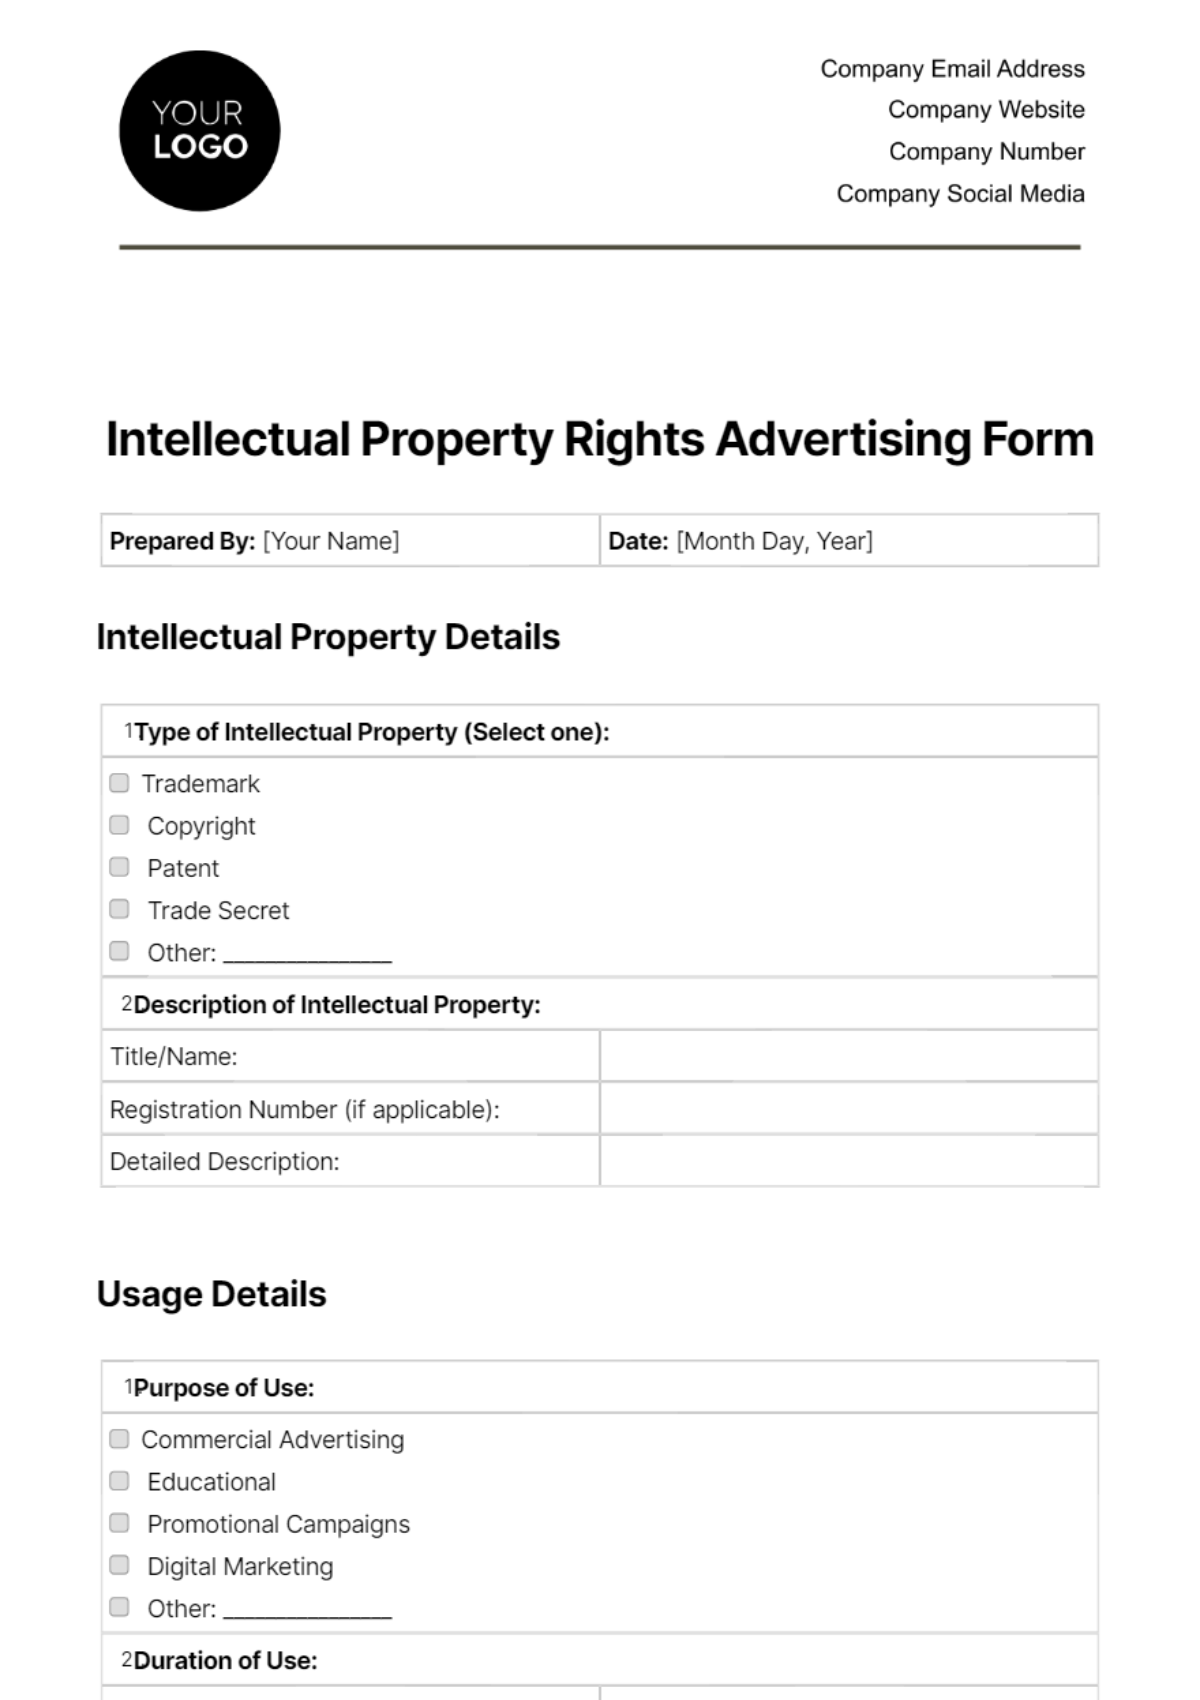 Intellectual Property Rights Advertising Form Template